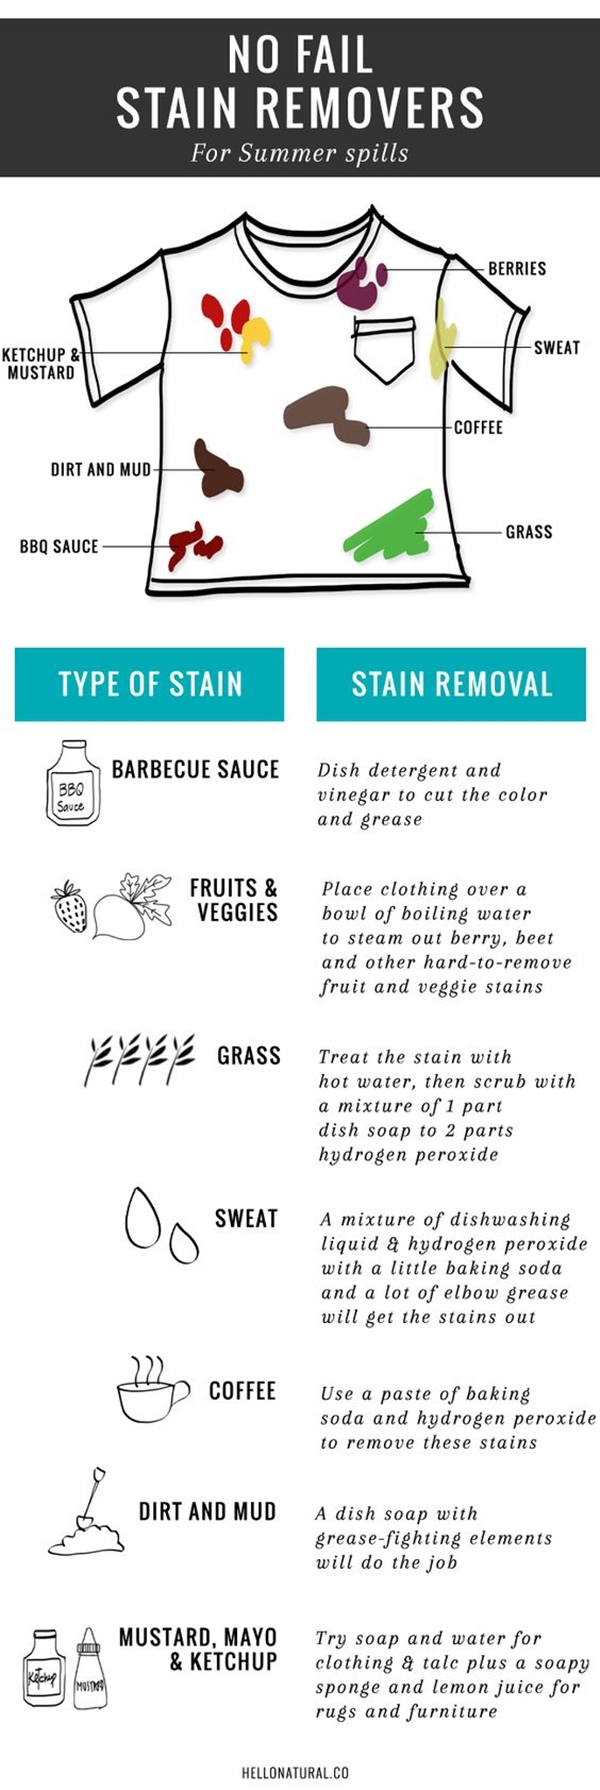 kinds-of-stains-and-how-to-get-rid-of-them-laundry-stain-cheat-sheets